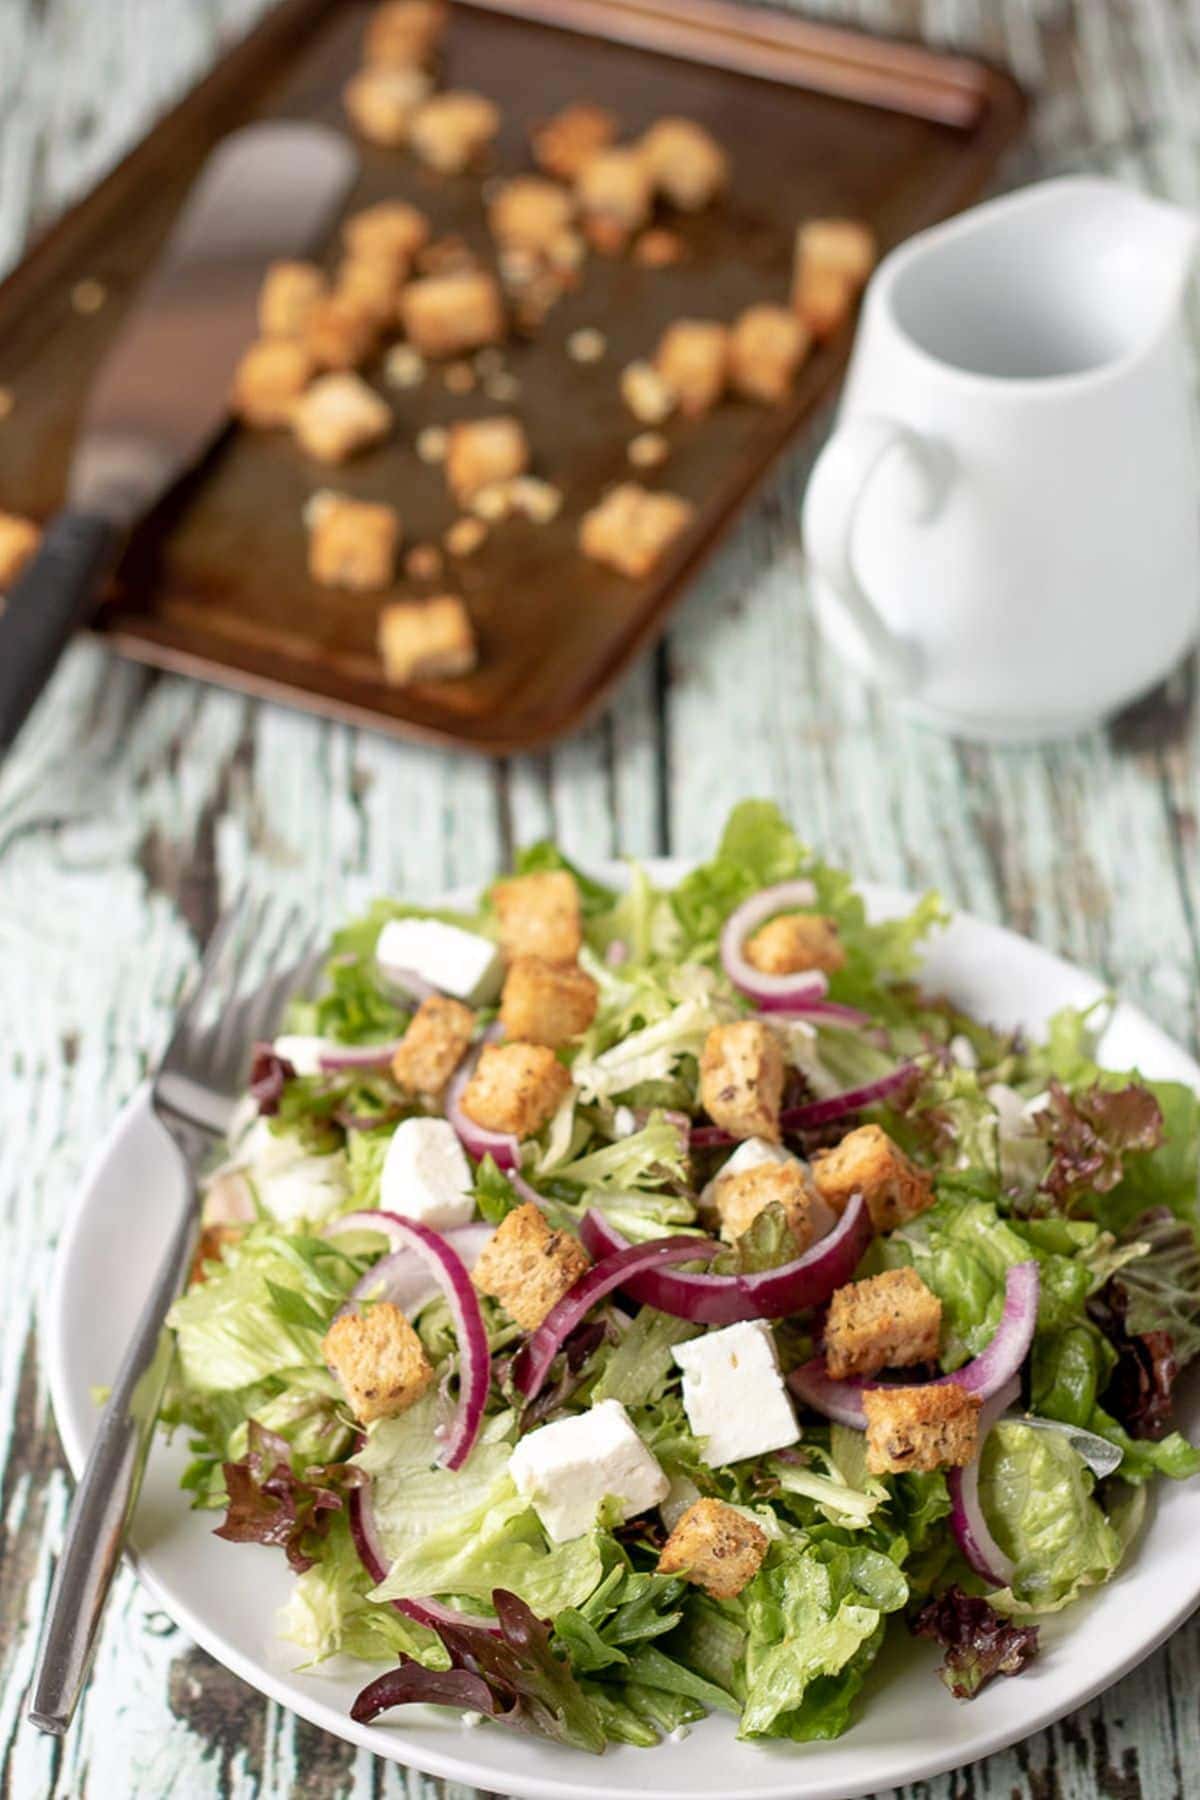 Served plate of feta and crouton salad ready to eat with a fork on the side and the tray of baked croutons in the background.